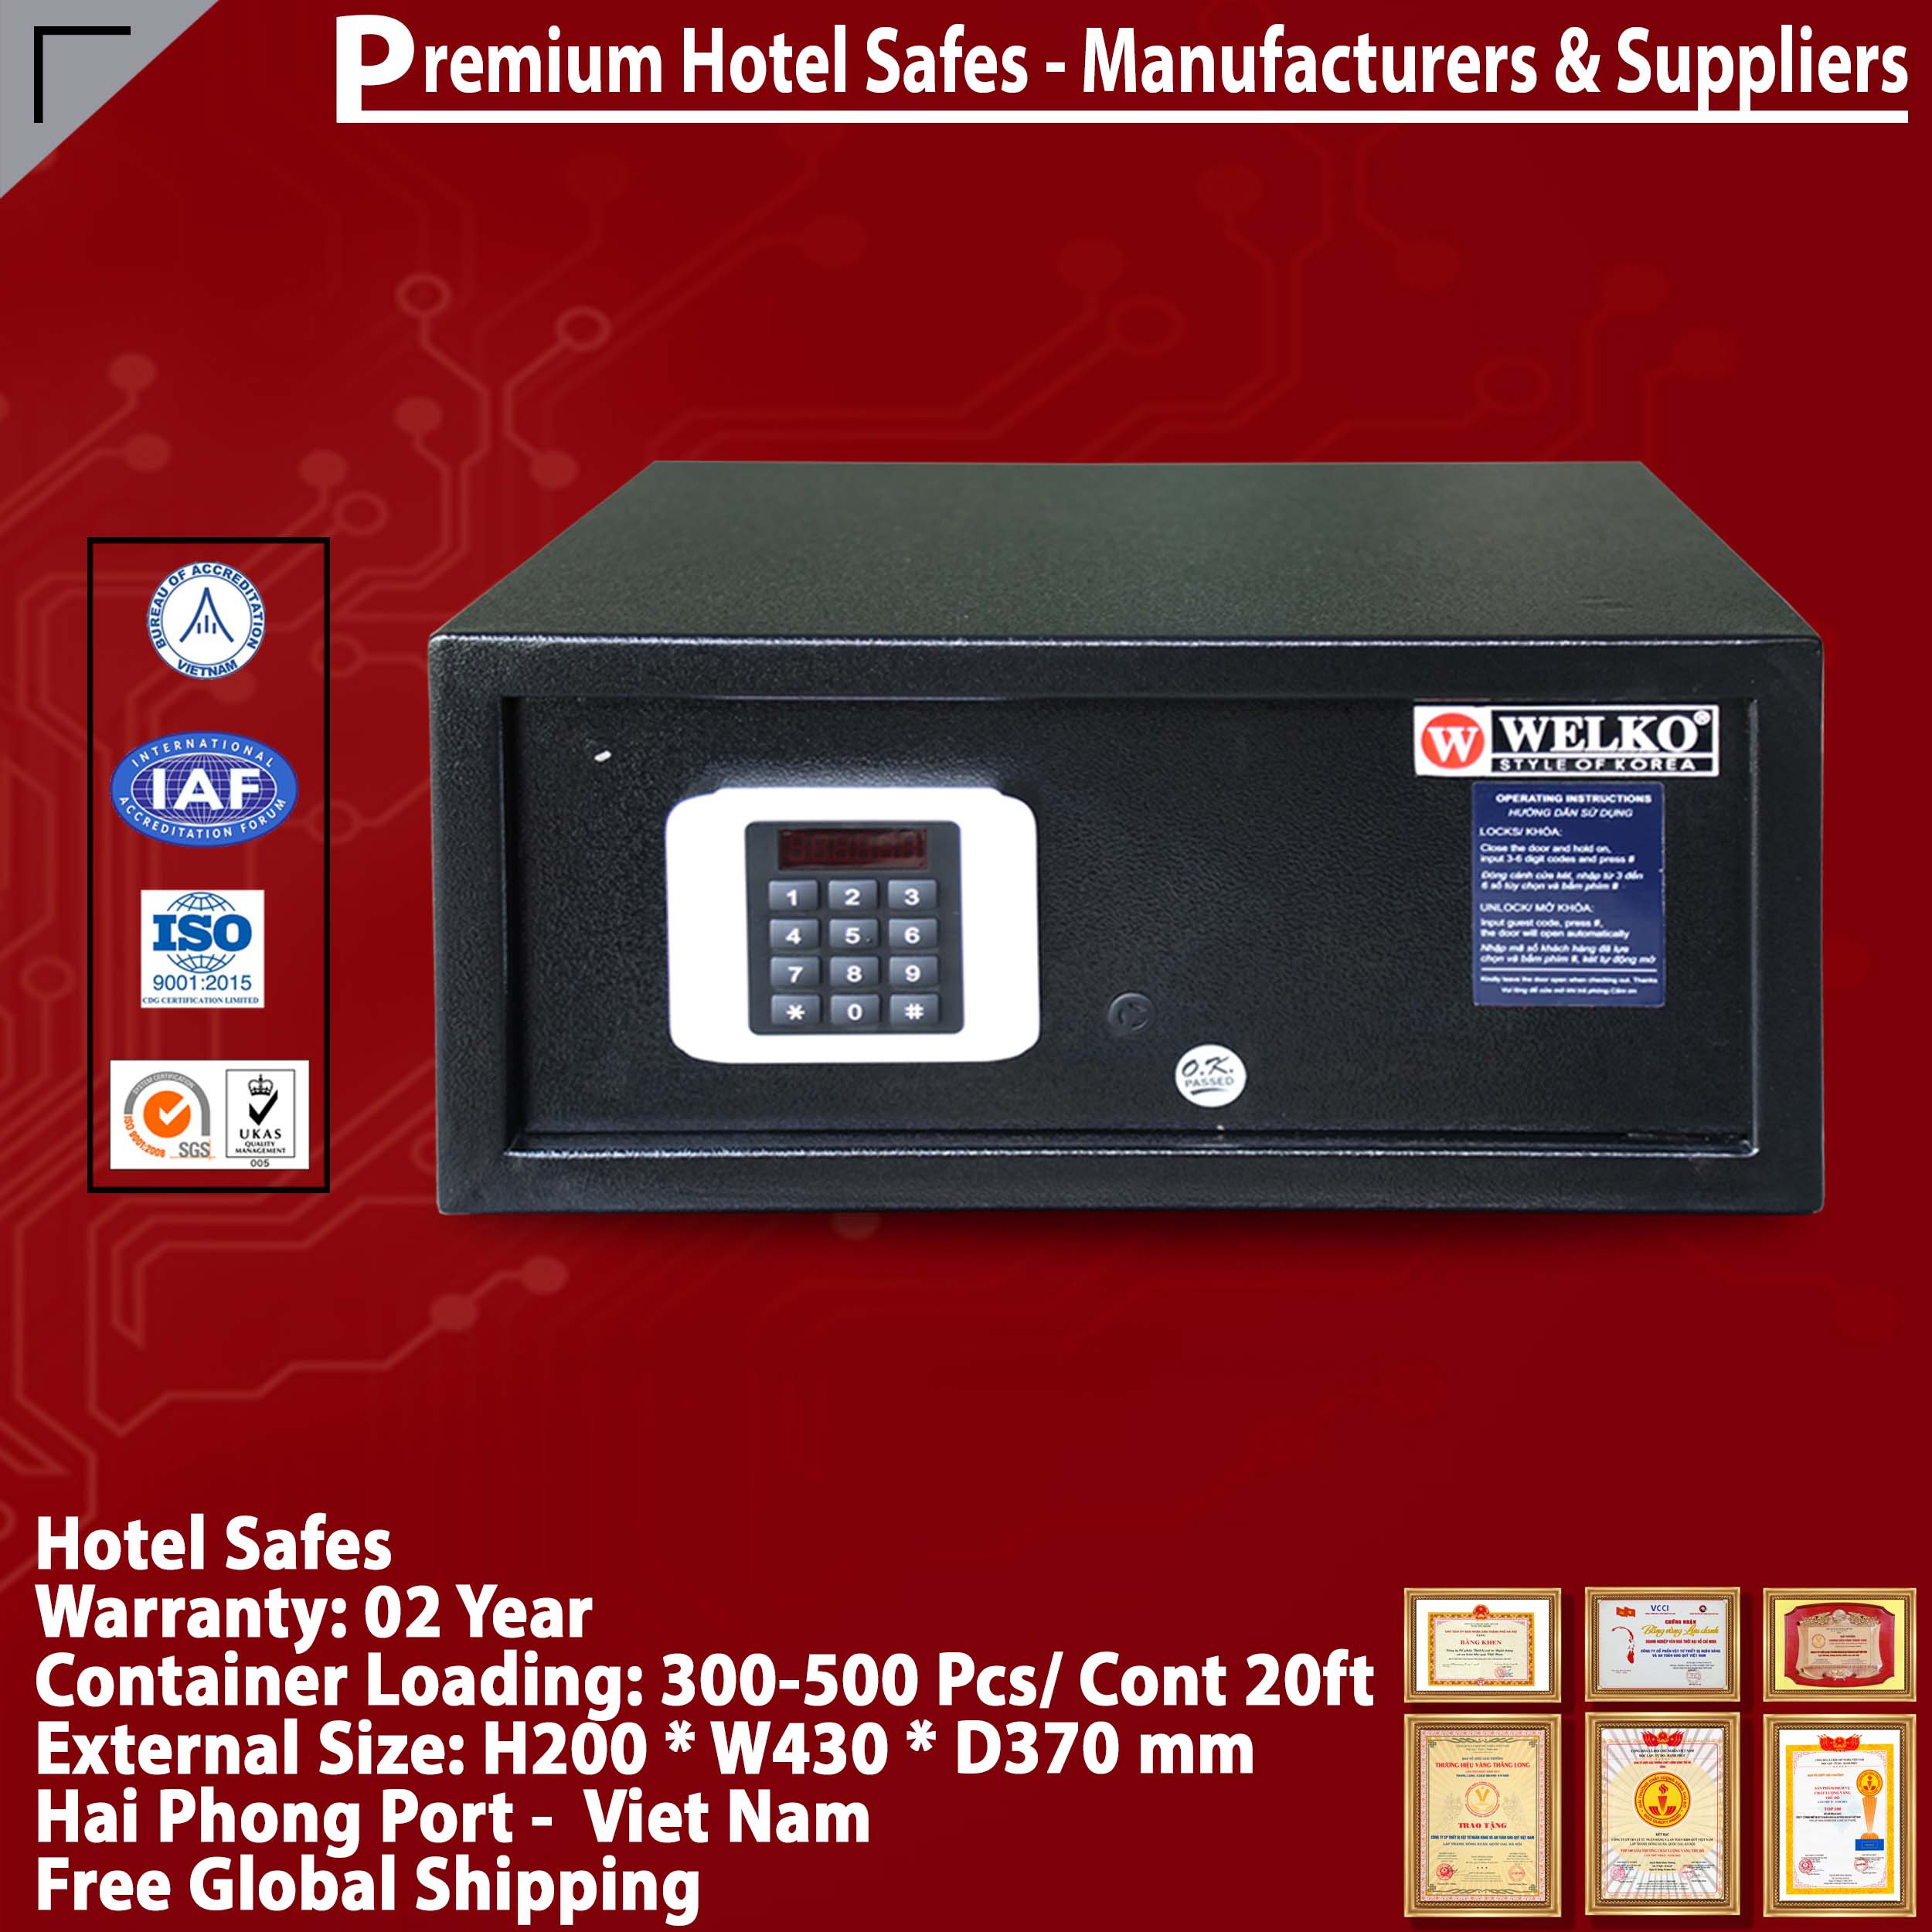 Best Sellers In Hotel SafesFactory Direct & Fast Shipping‎ WELKO